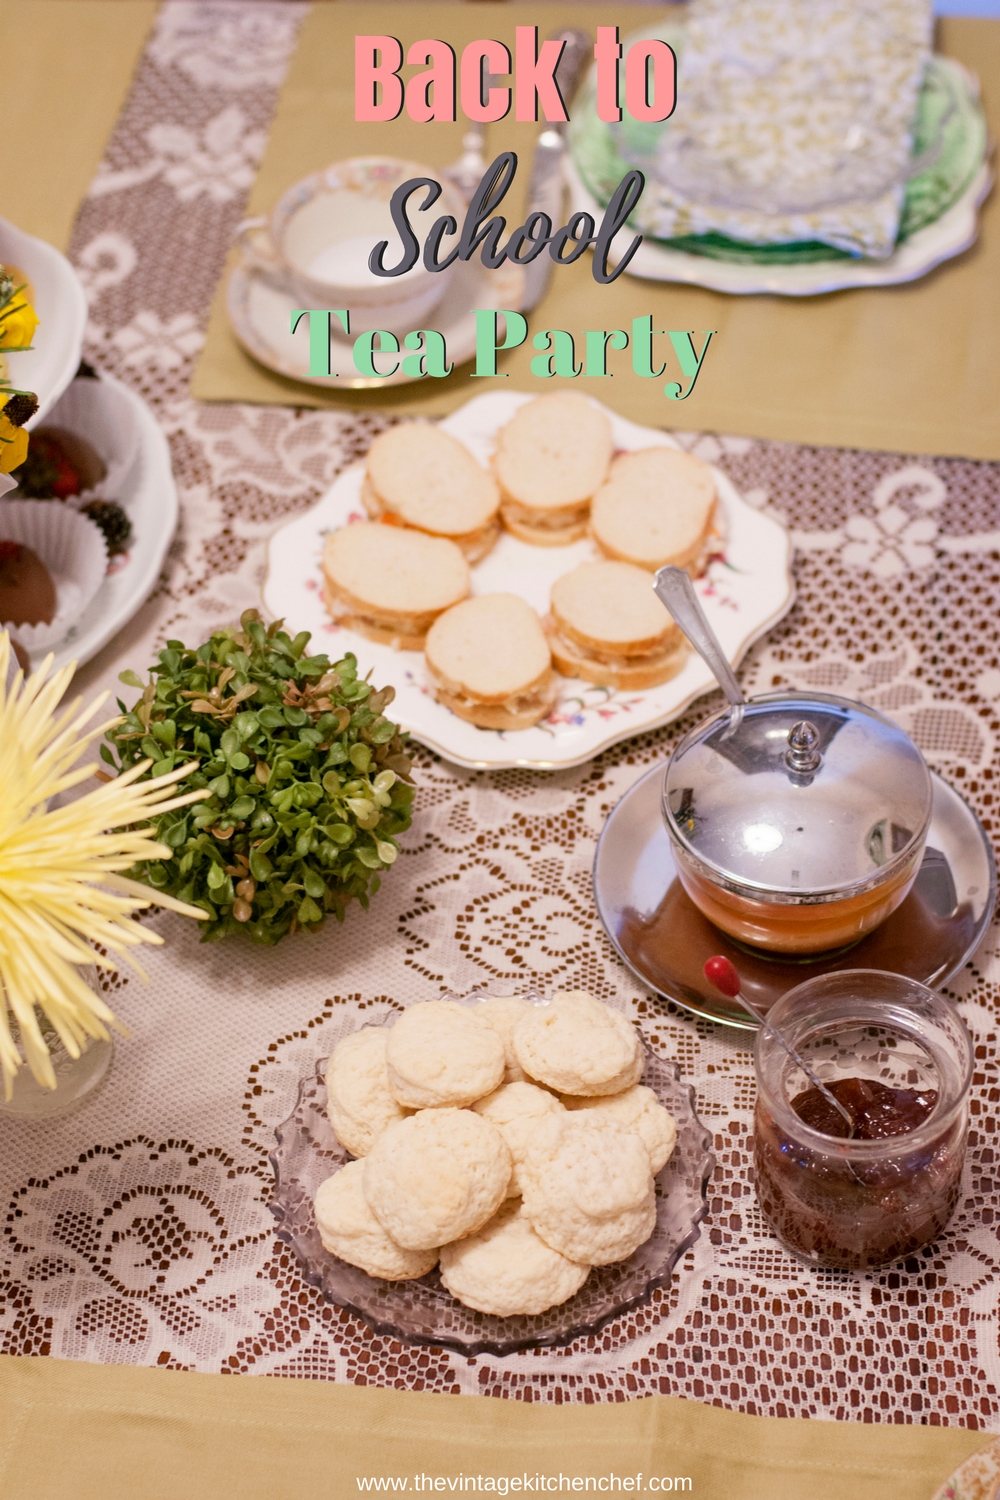 Launch the new school year with a simple, fun Back to School Tea Party! Its a fantastic way to do something a bit out of the ordinary for the end of summer.